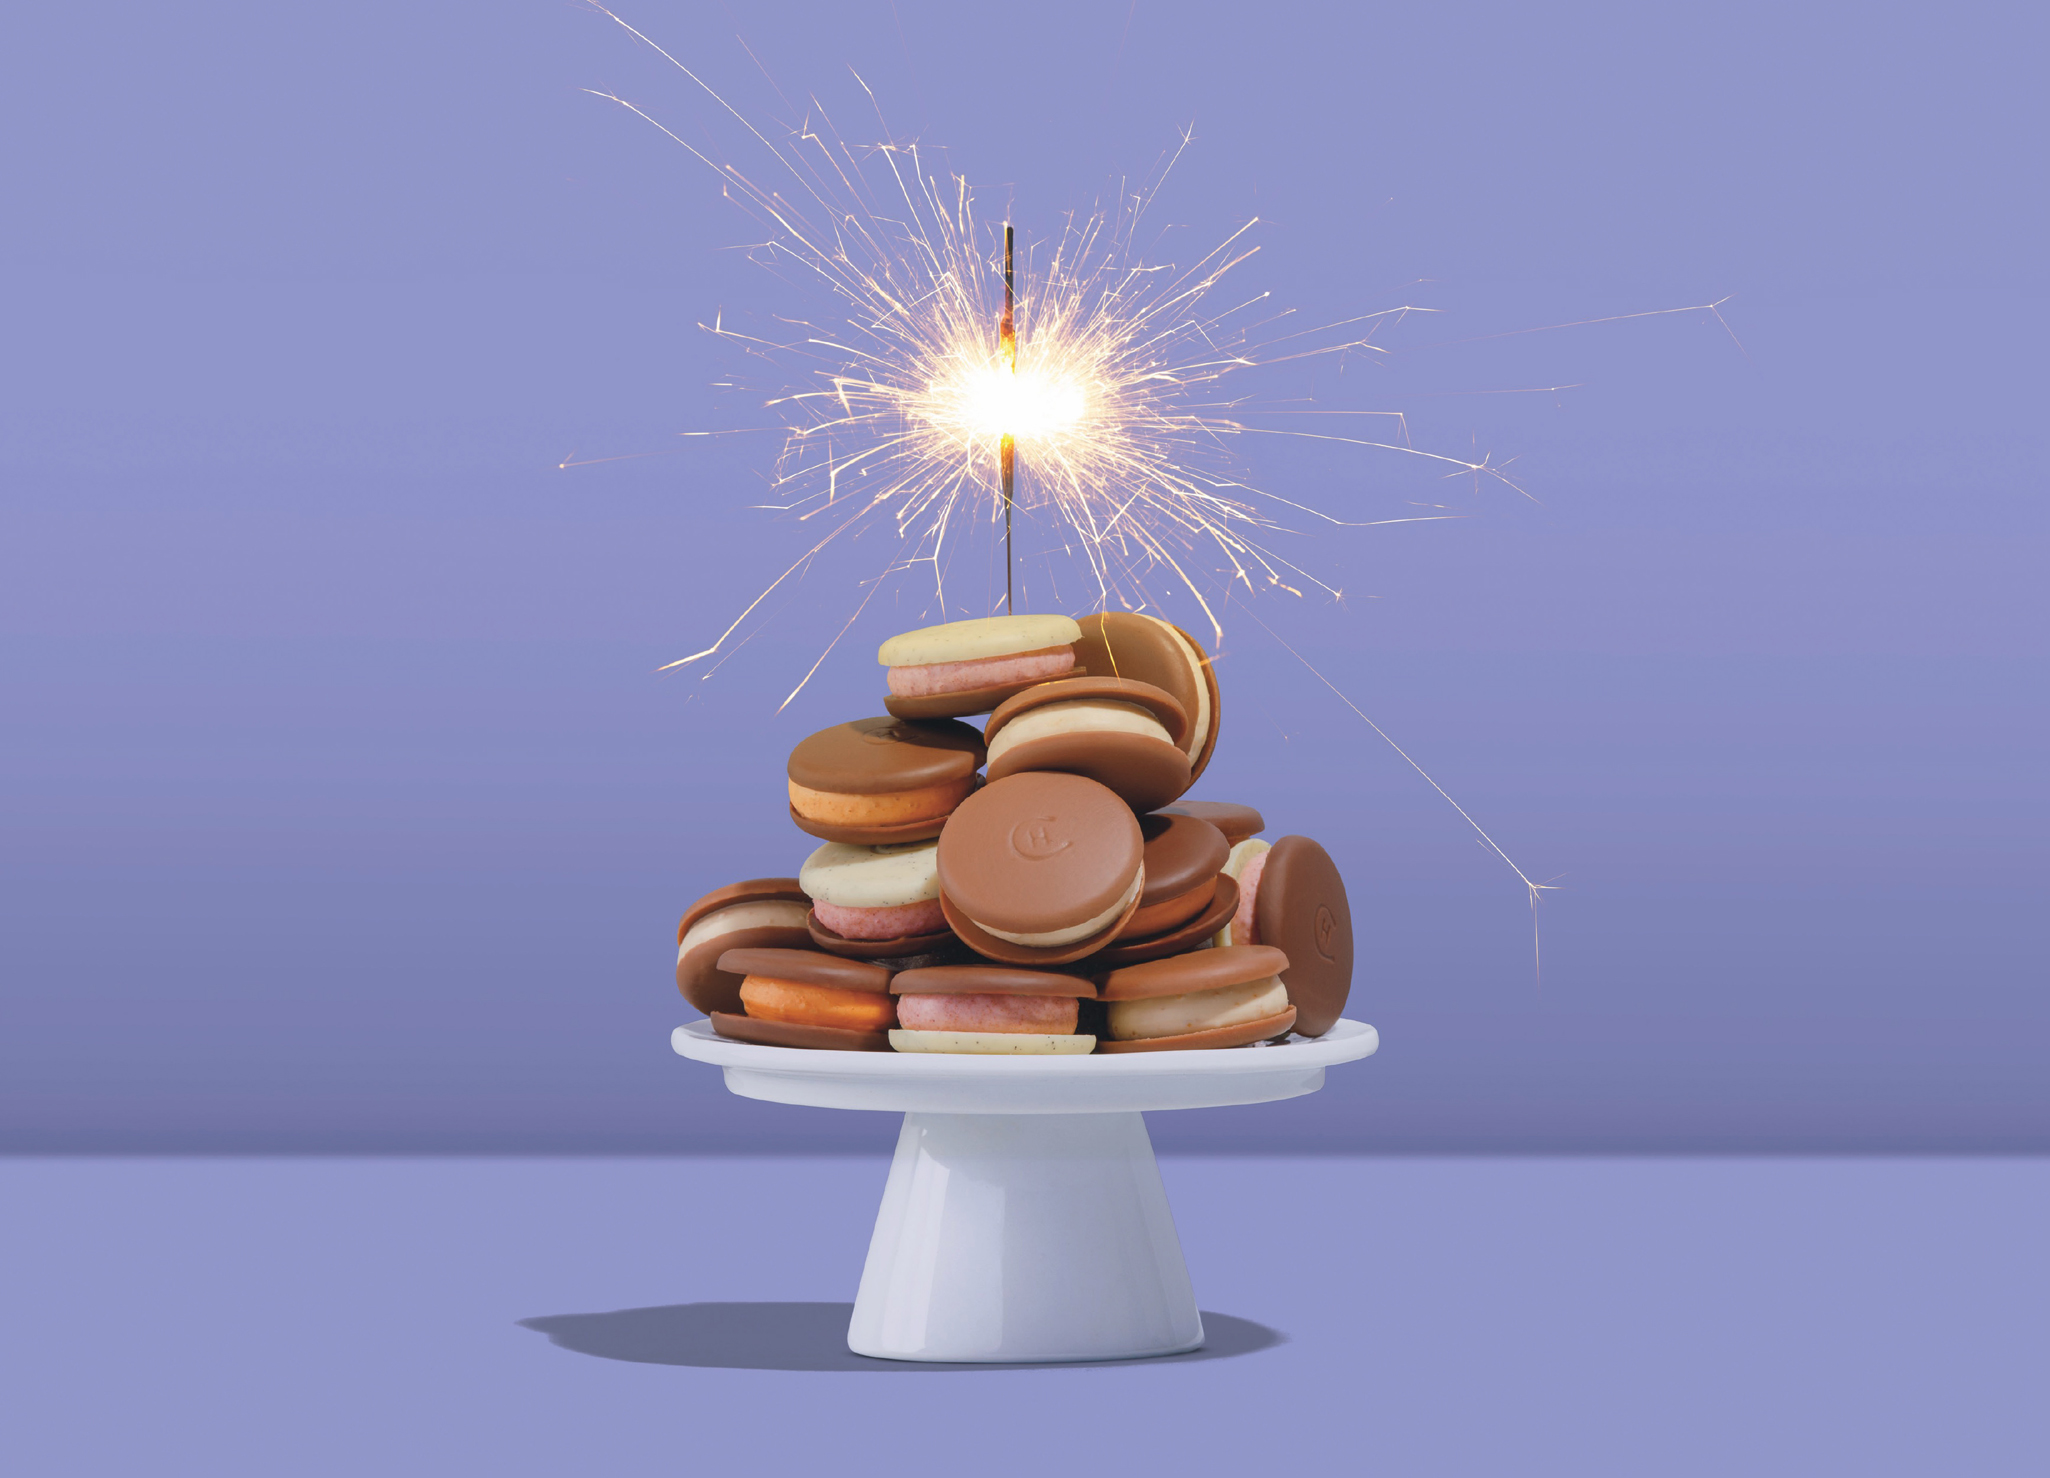 creative food photography - tower of chocolates with sparkler